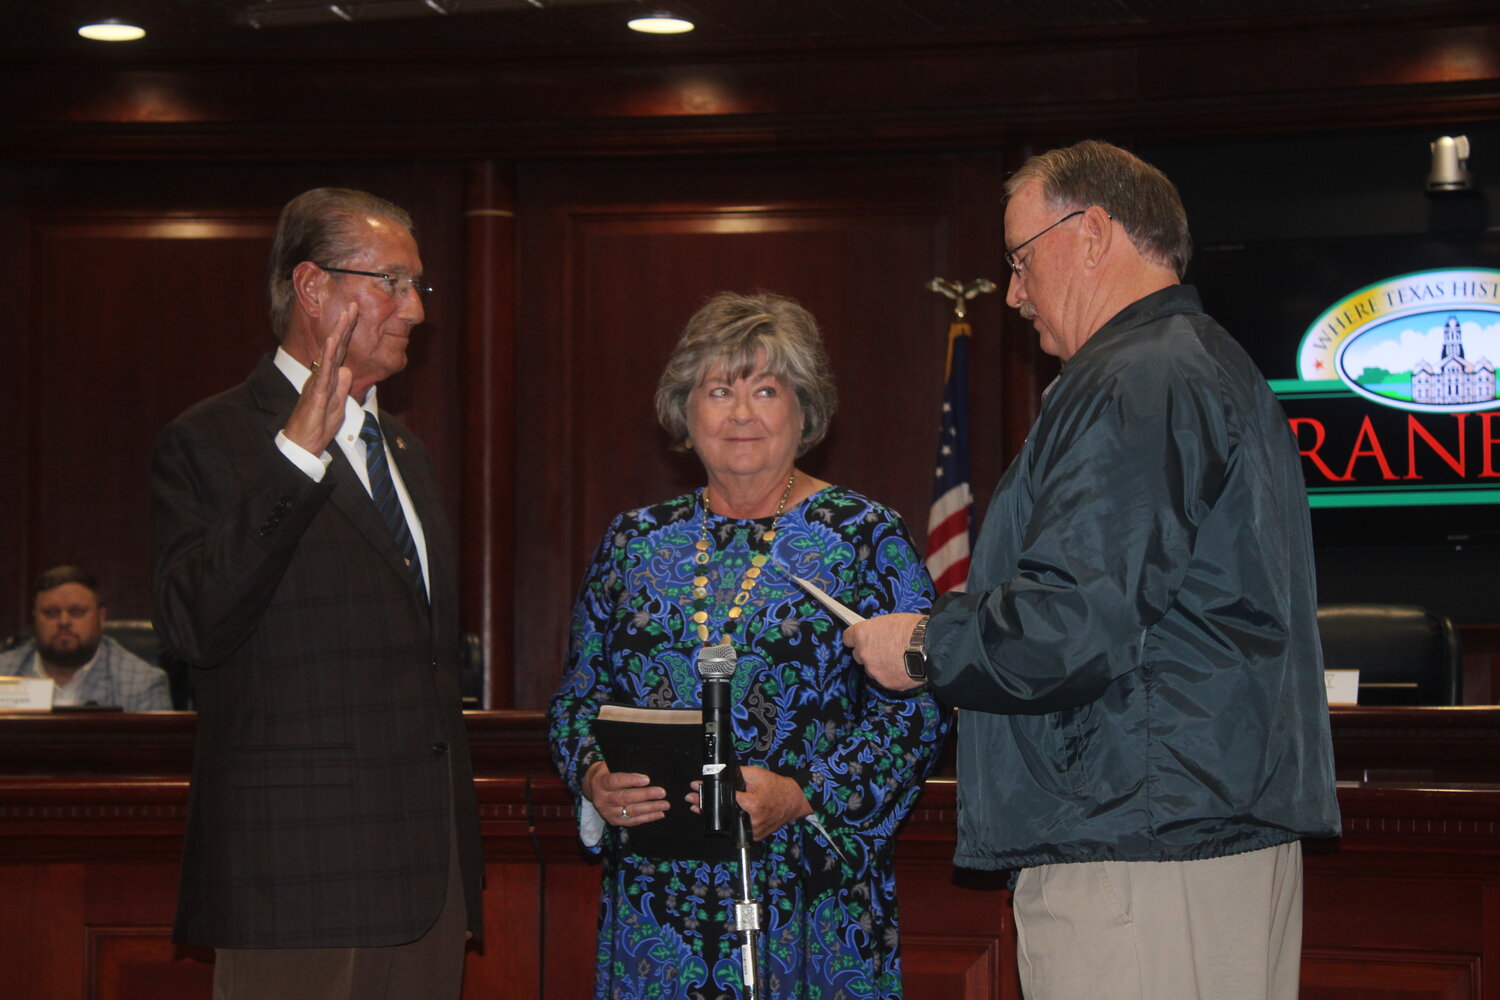 Gary “Skip” Overdier is sworn in as a new member of the Granbury City Council during a regular scheduled meeting on Dec. 19.